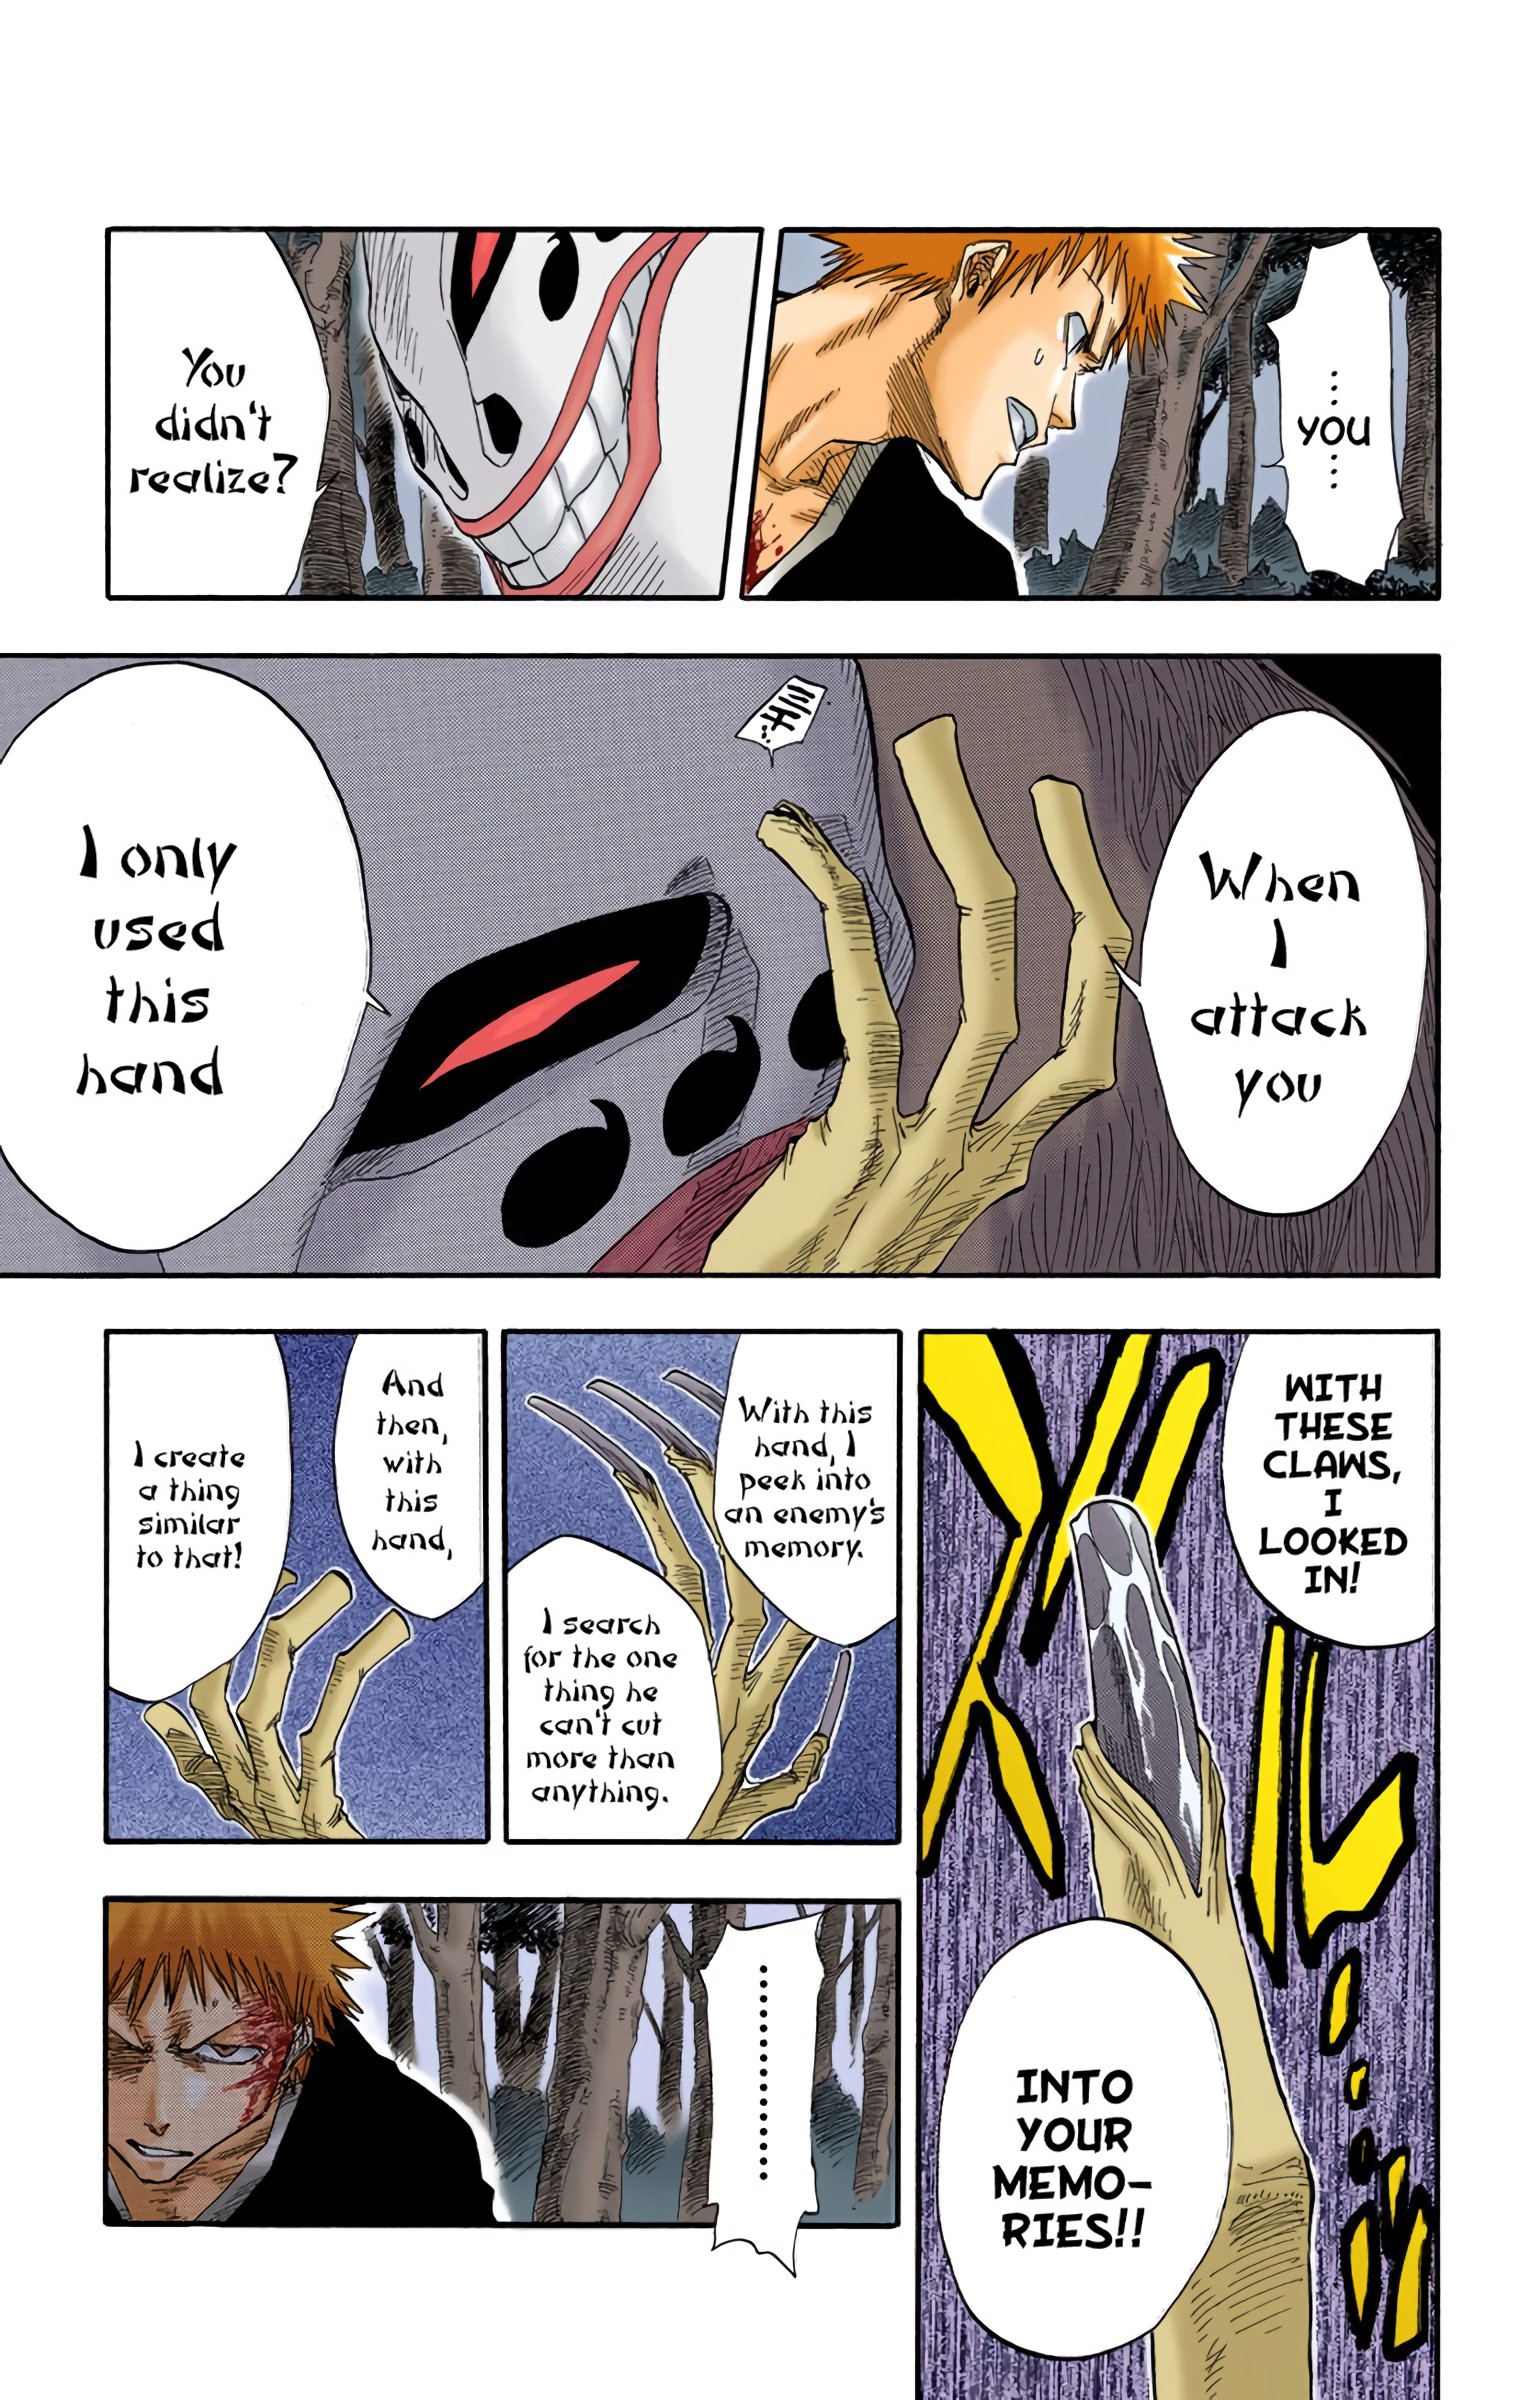 Bleach - Digital Colored Comics Vol.3 Chapter 23: 6/17 Op. 7 Sharp Will, Dull Blade - Picture 3